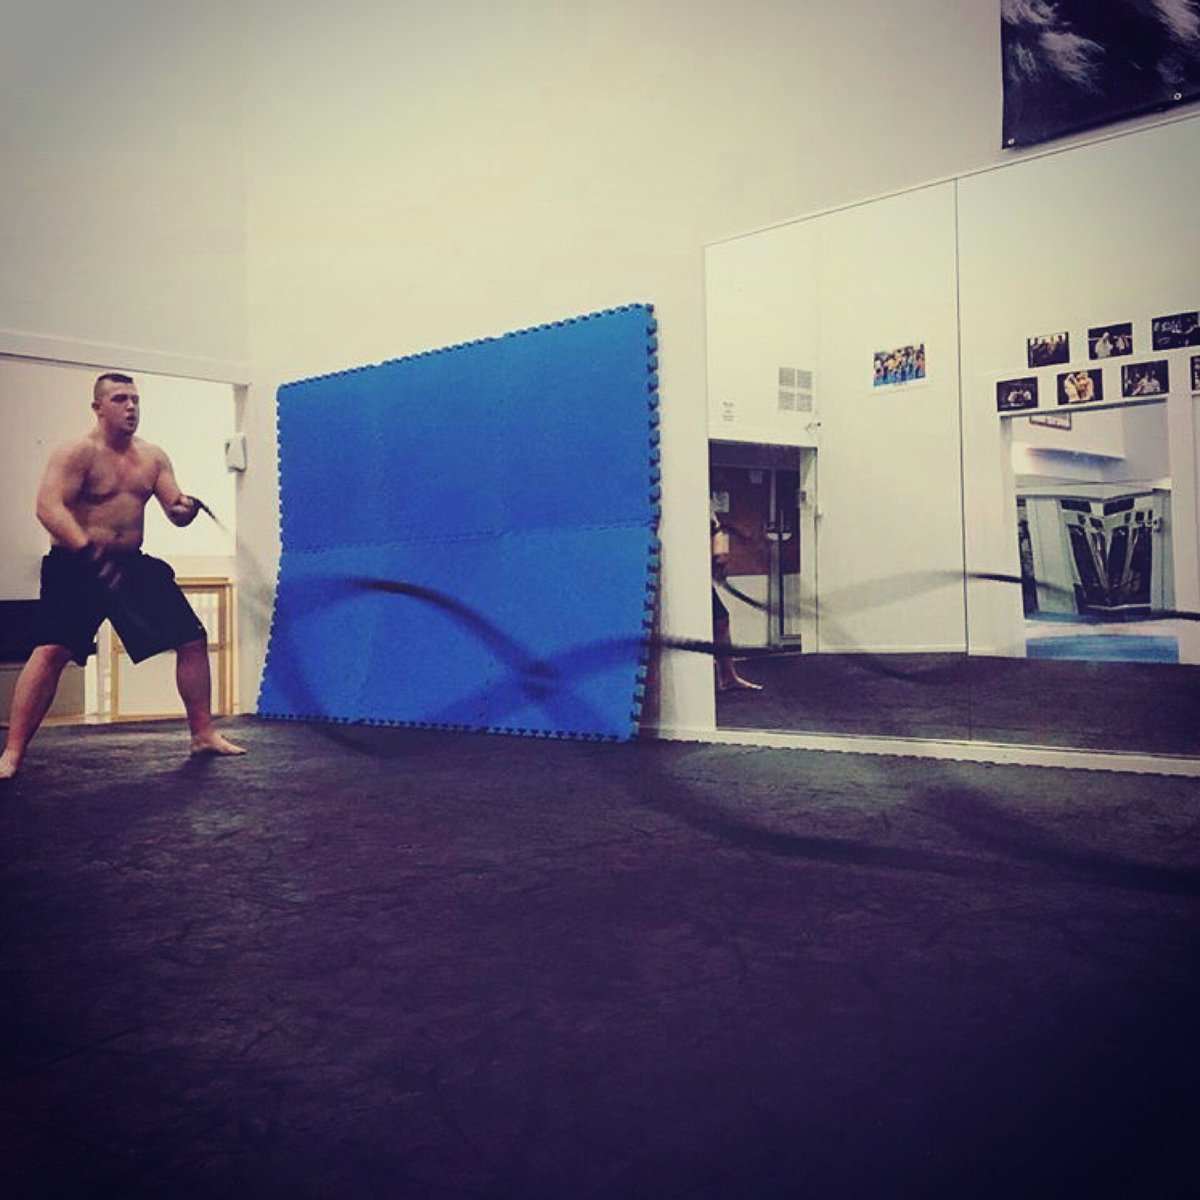 Mitchell Page, training for his debut fight on May 5th in Vancouver! #GoTime #BlackBoxMMA #MMA #ThaiBoxing #MuayThai #Boxing #Kickboxing #MartialArts #Sport #Kickboxer #MixedMartialArts #ThaiBoxer #Boxer #BrazilianJujitsu #Jujitsu #BJJ #Wrestling #Grappling #CombatSports